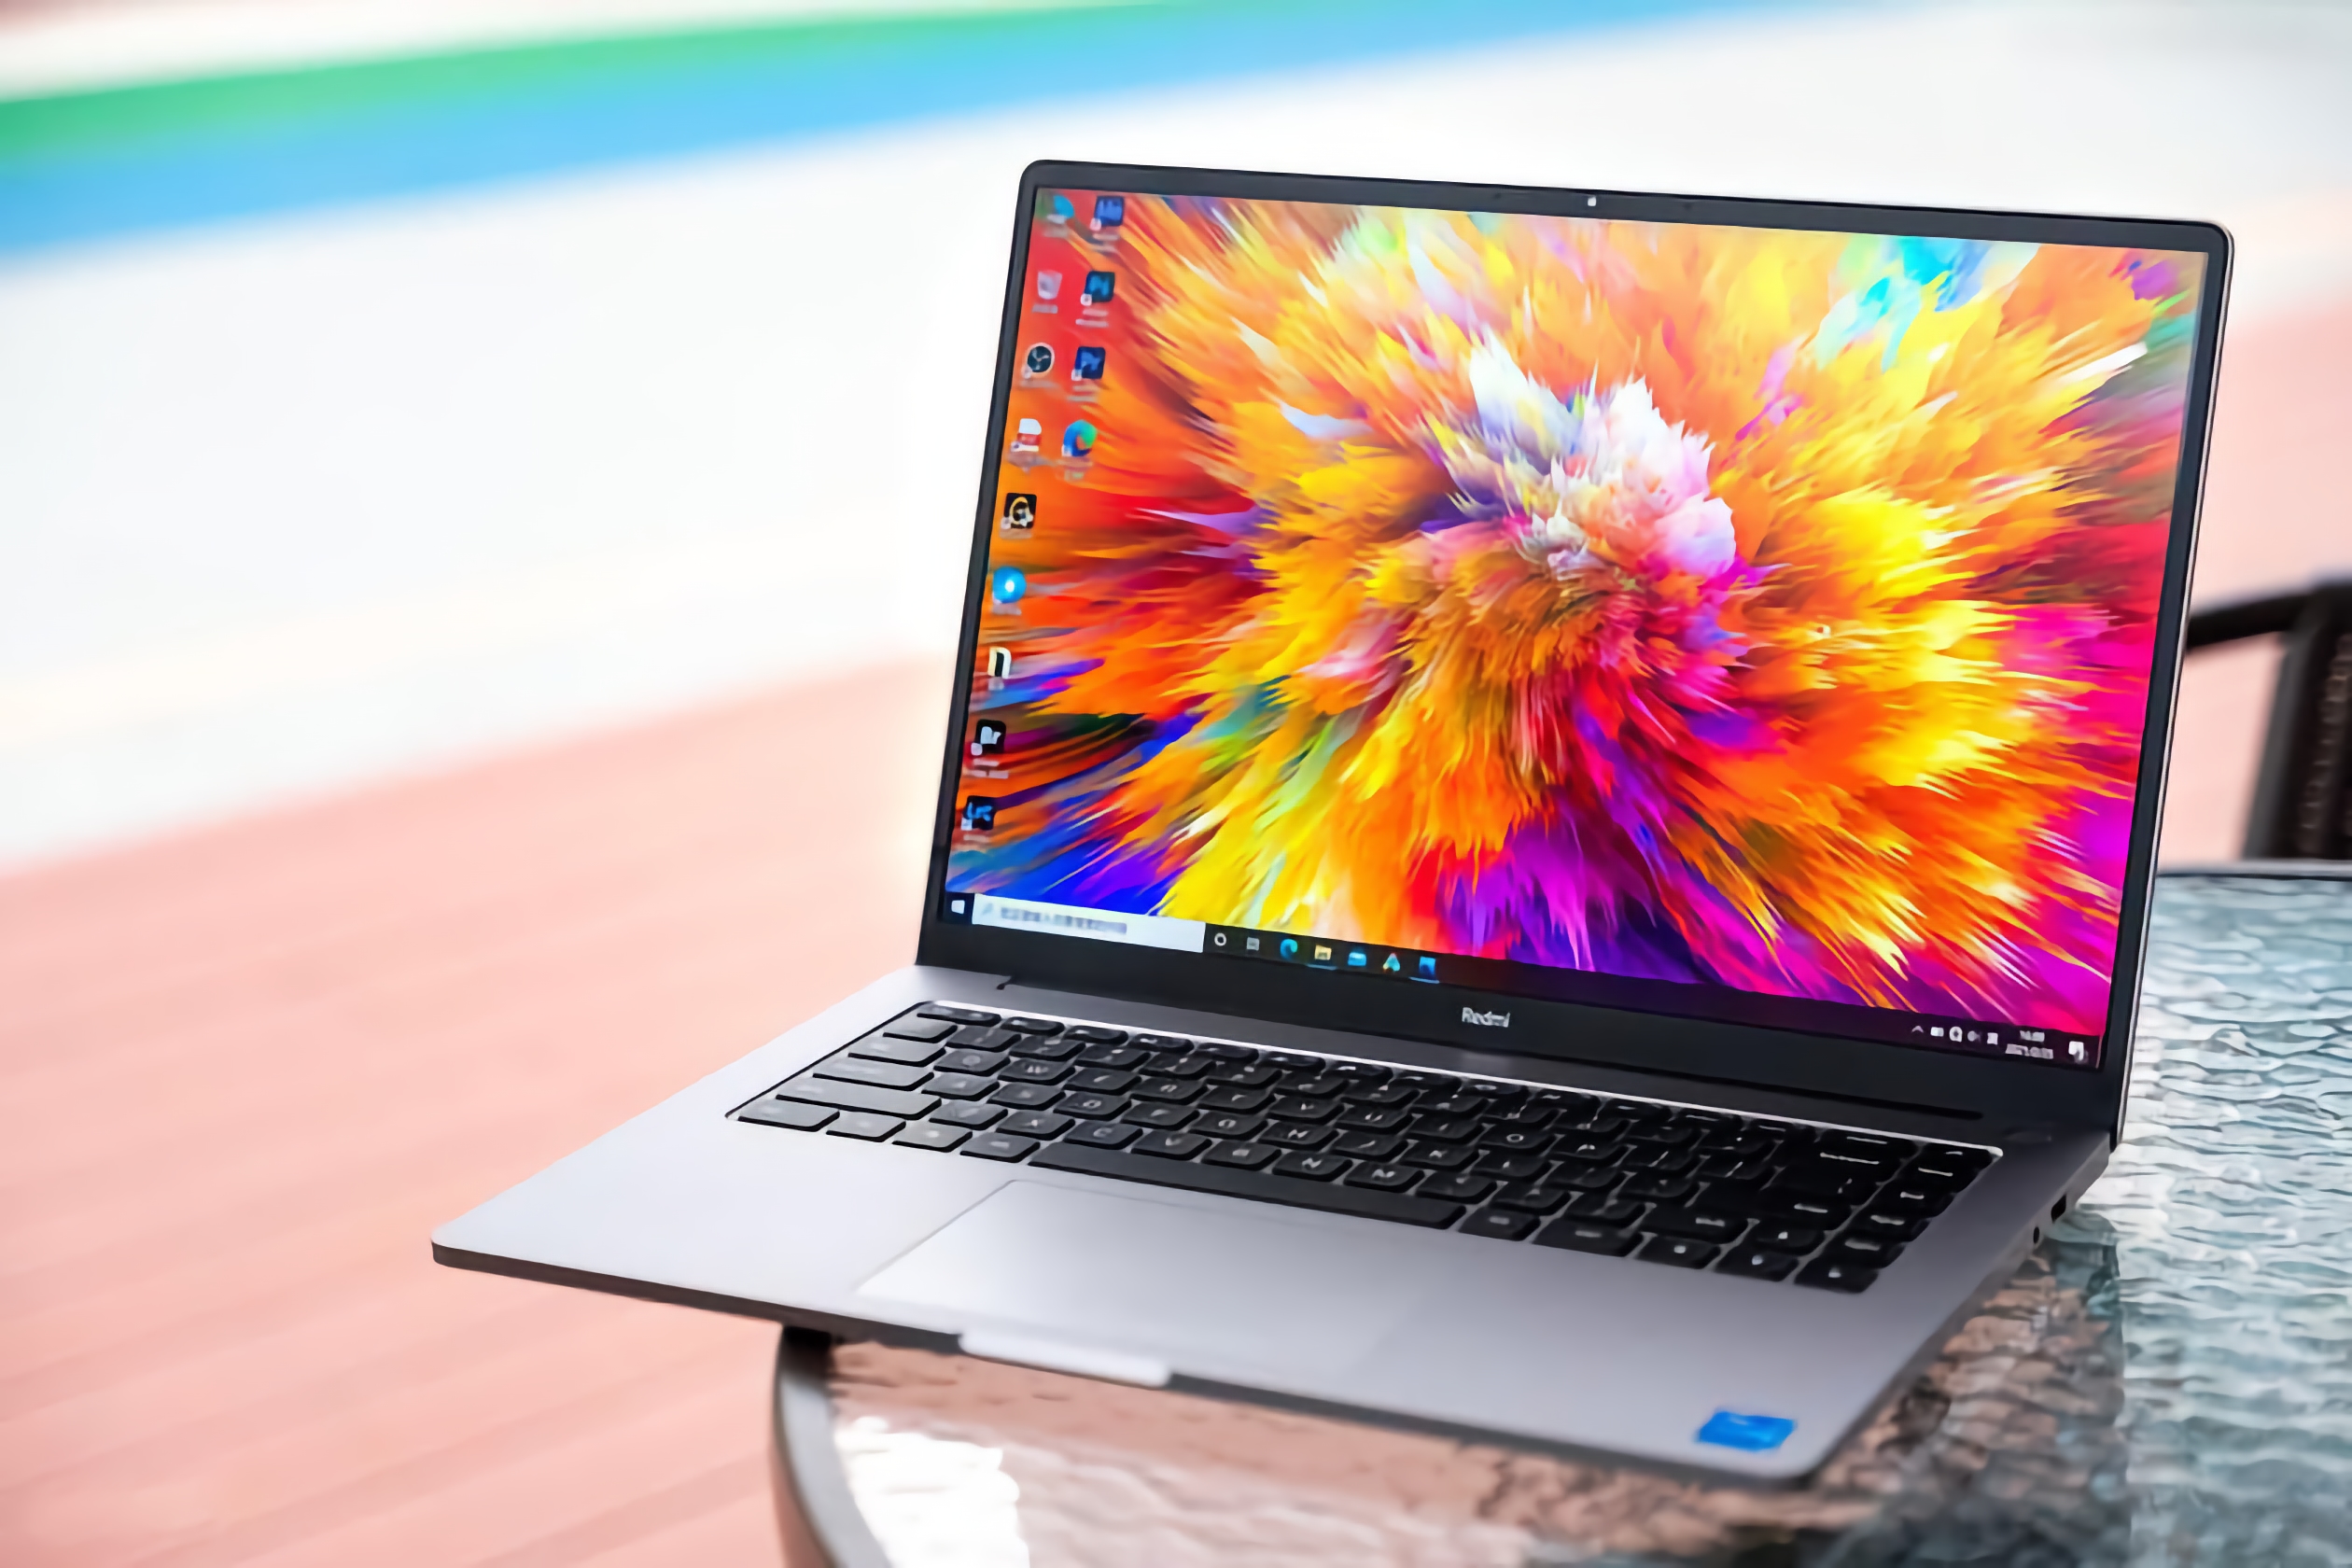 Xiaomi will unveil Mi Notebook Pro 14 and Mi Notebook Ultra 15 laptops on August 26